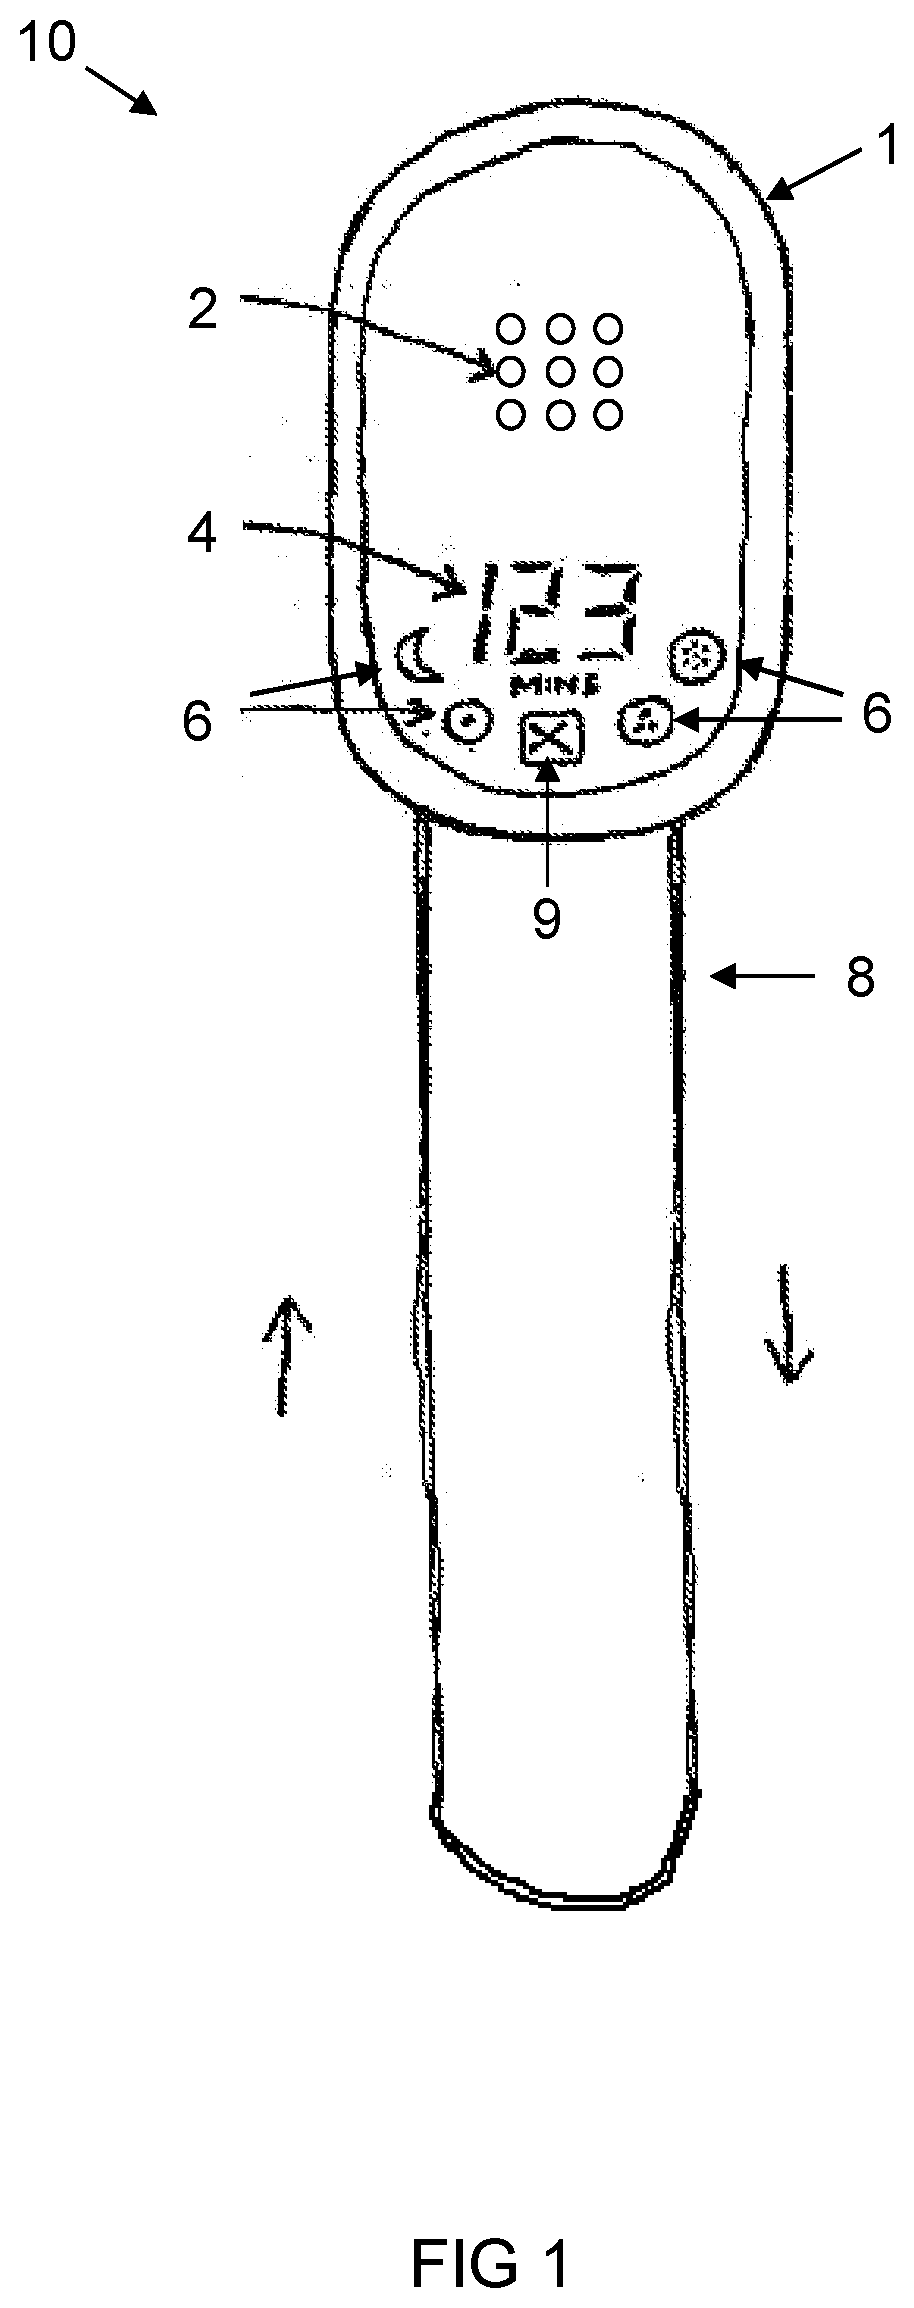 Portable apparatus for generating electricity